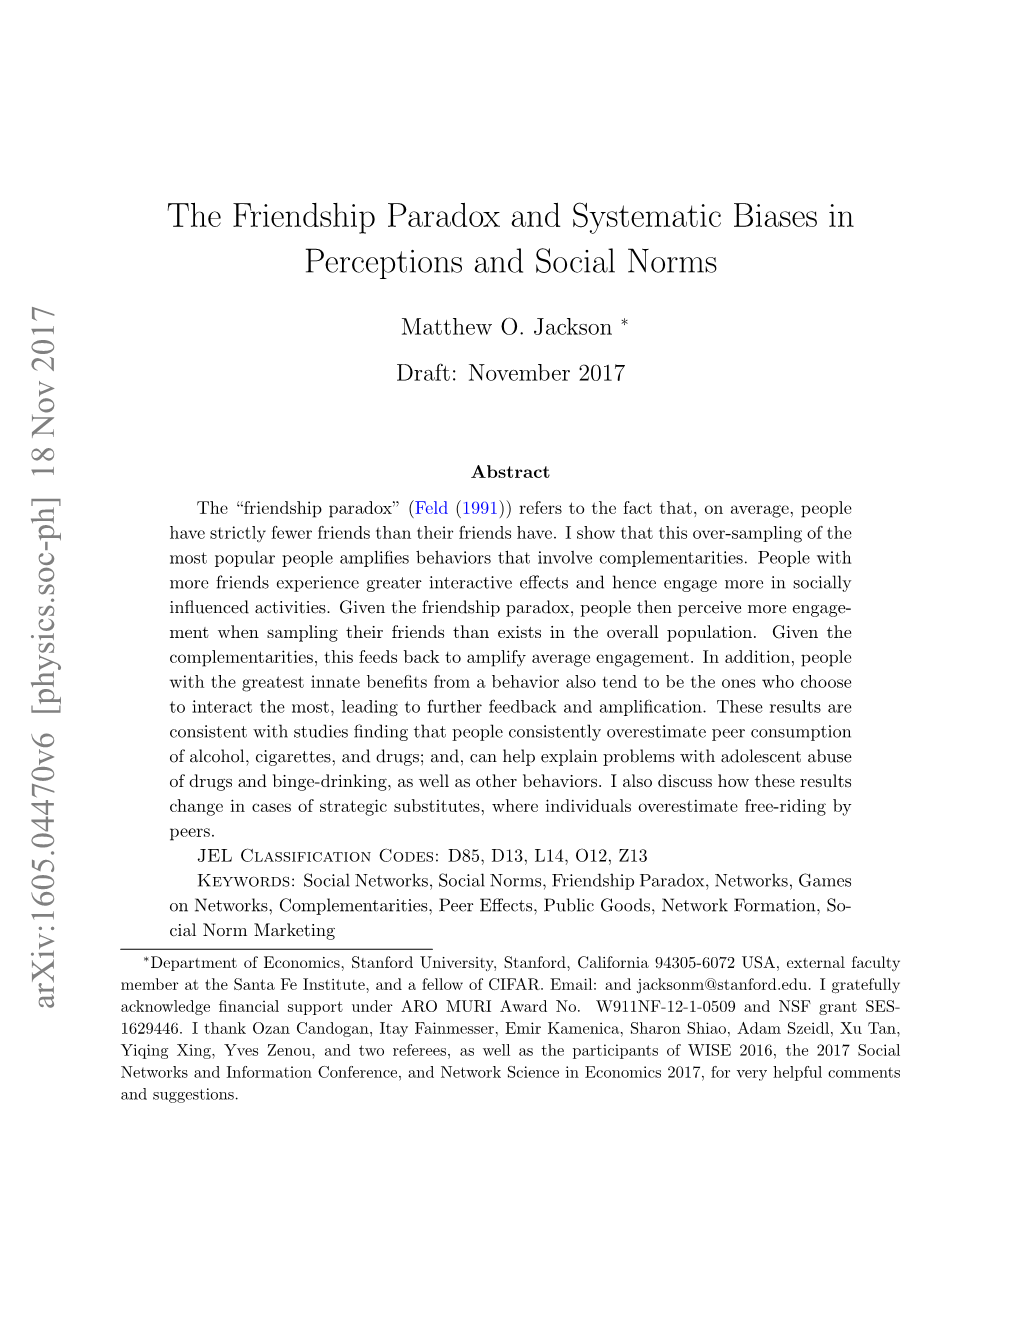 The Friendship Paradox and Systematic Biases in Perceptions and Social Norms